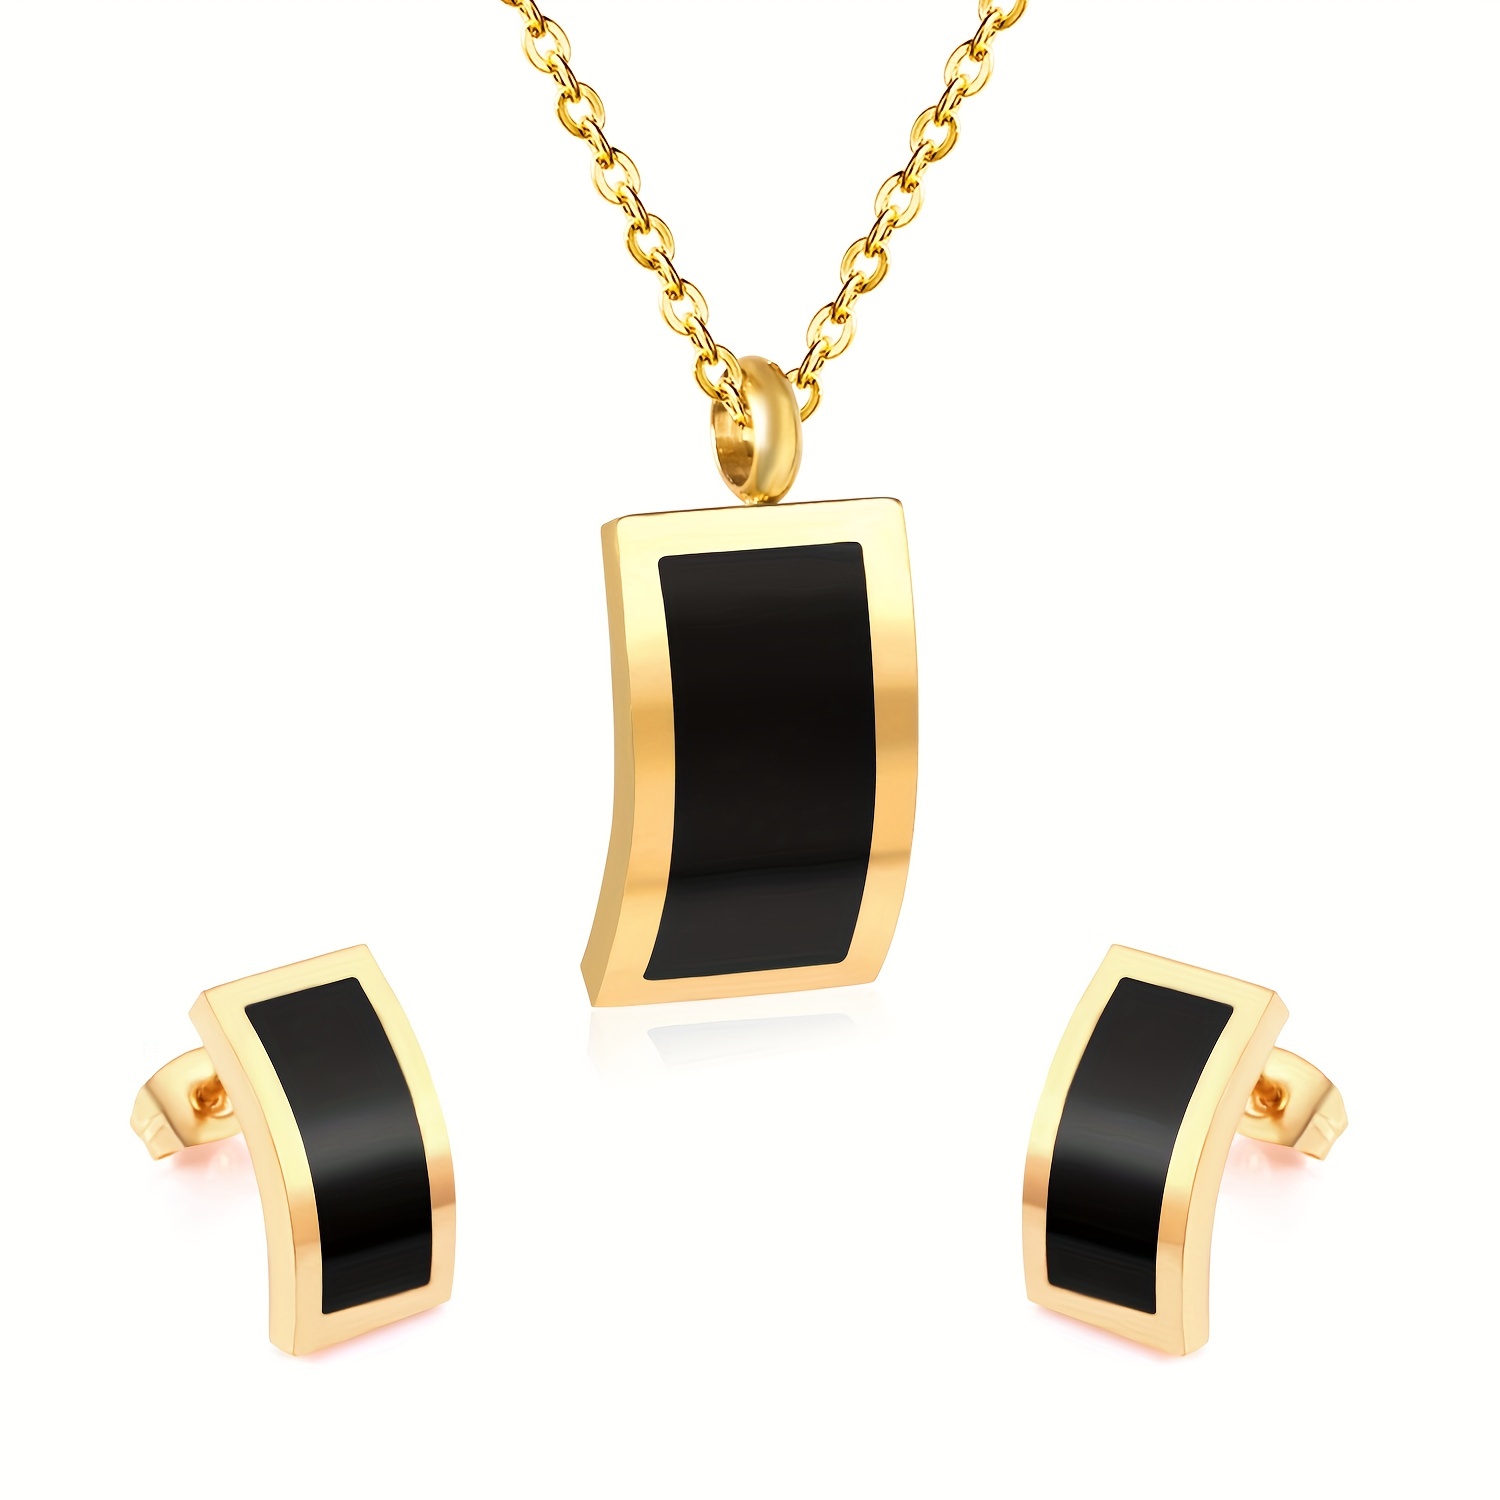 Temu 3pcs Earrings Plus Necklace Elegant Jewelry, Jewels Set Made Stainless Steel 18K Gold Plated Curved Rectangular Design Fashion Jewelry for Female